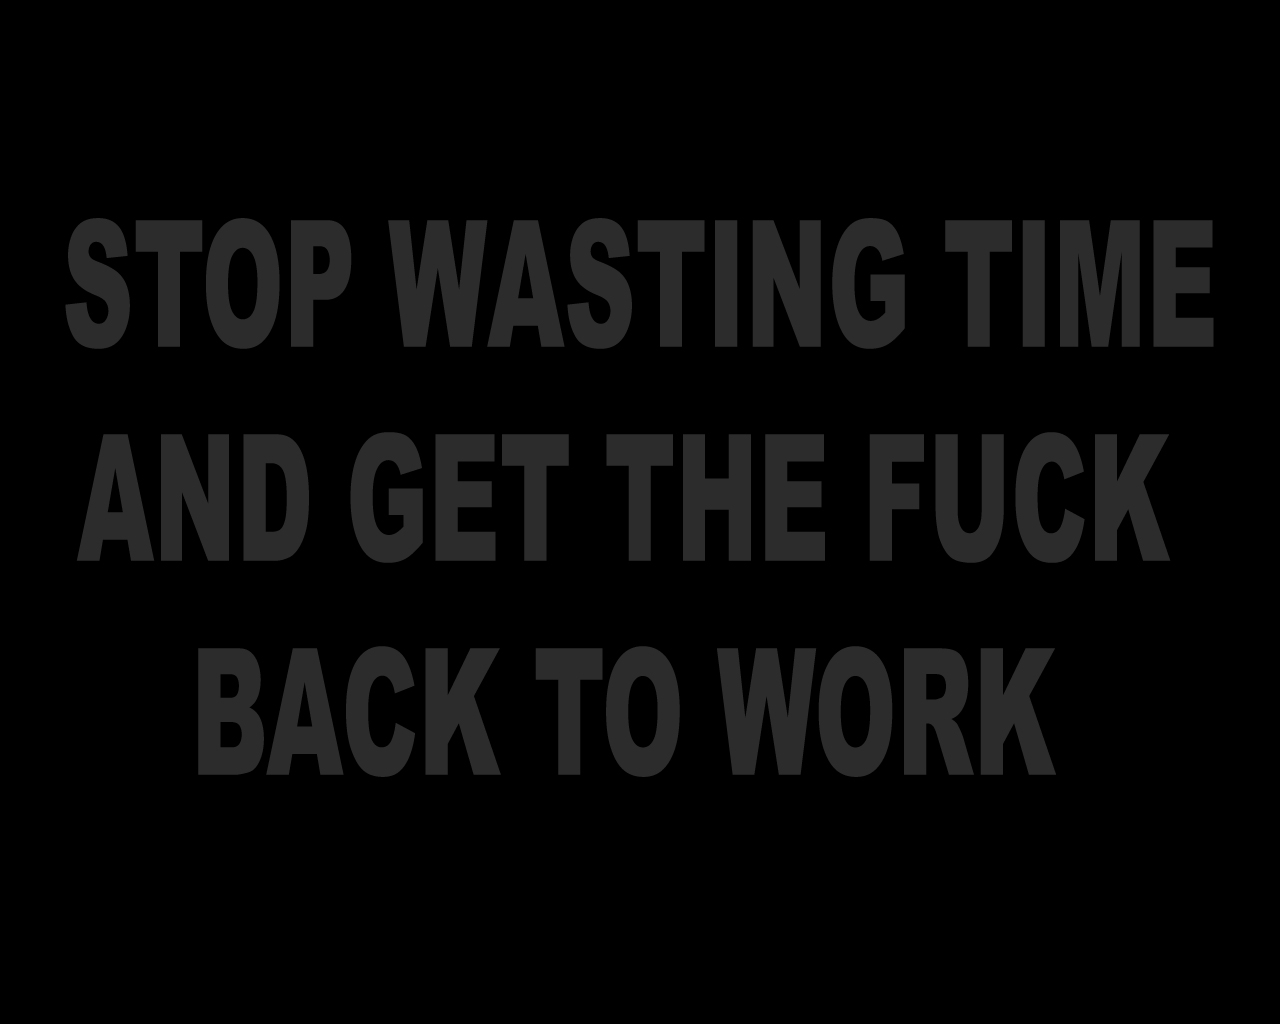 Stop wasting time and get the fuck back to work